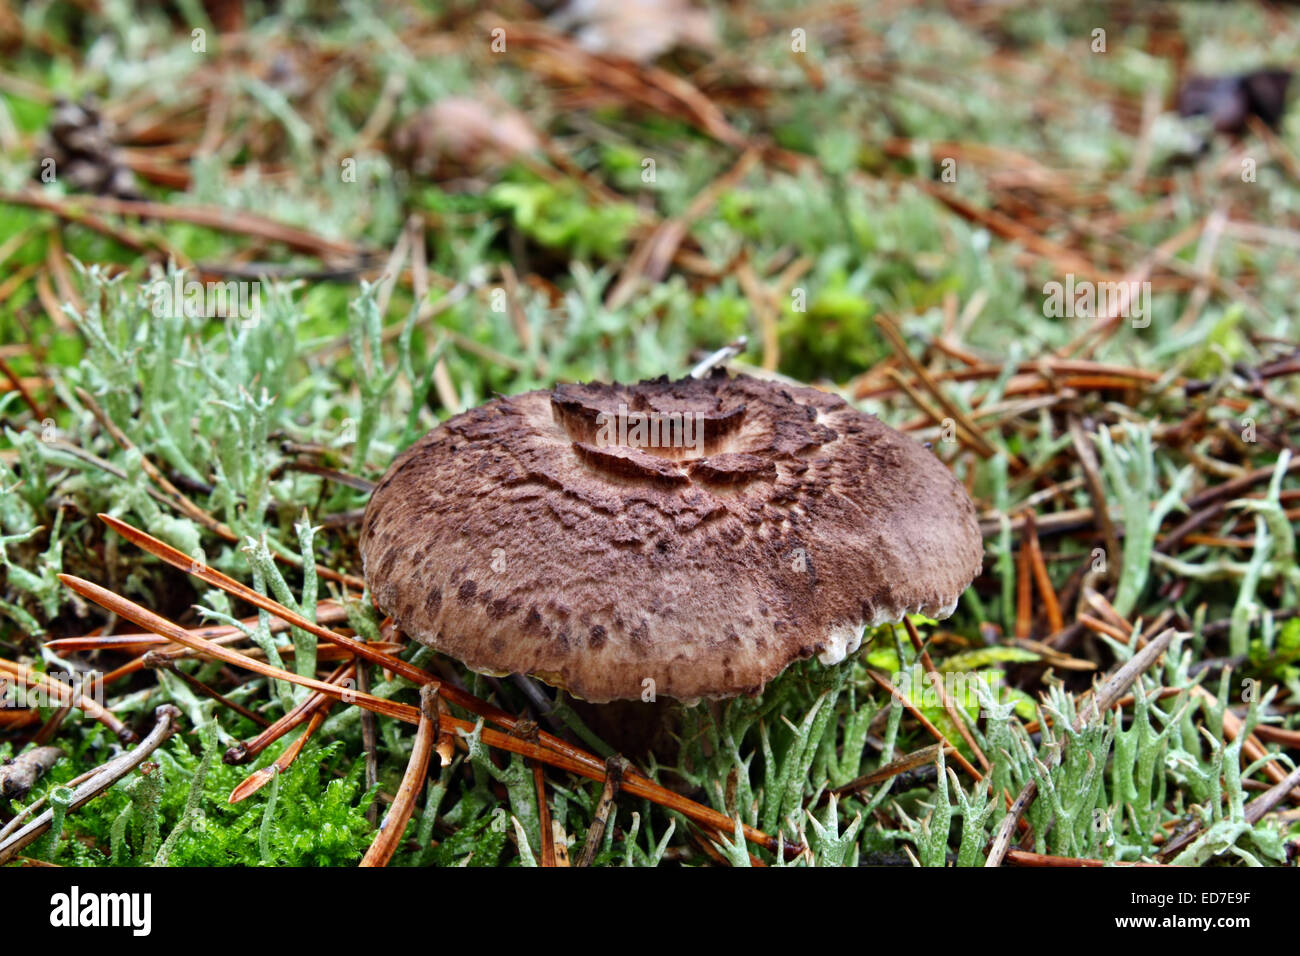 Brown mushrooms sarcodon growing in the forest Stock Photo